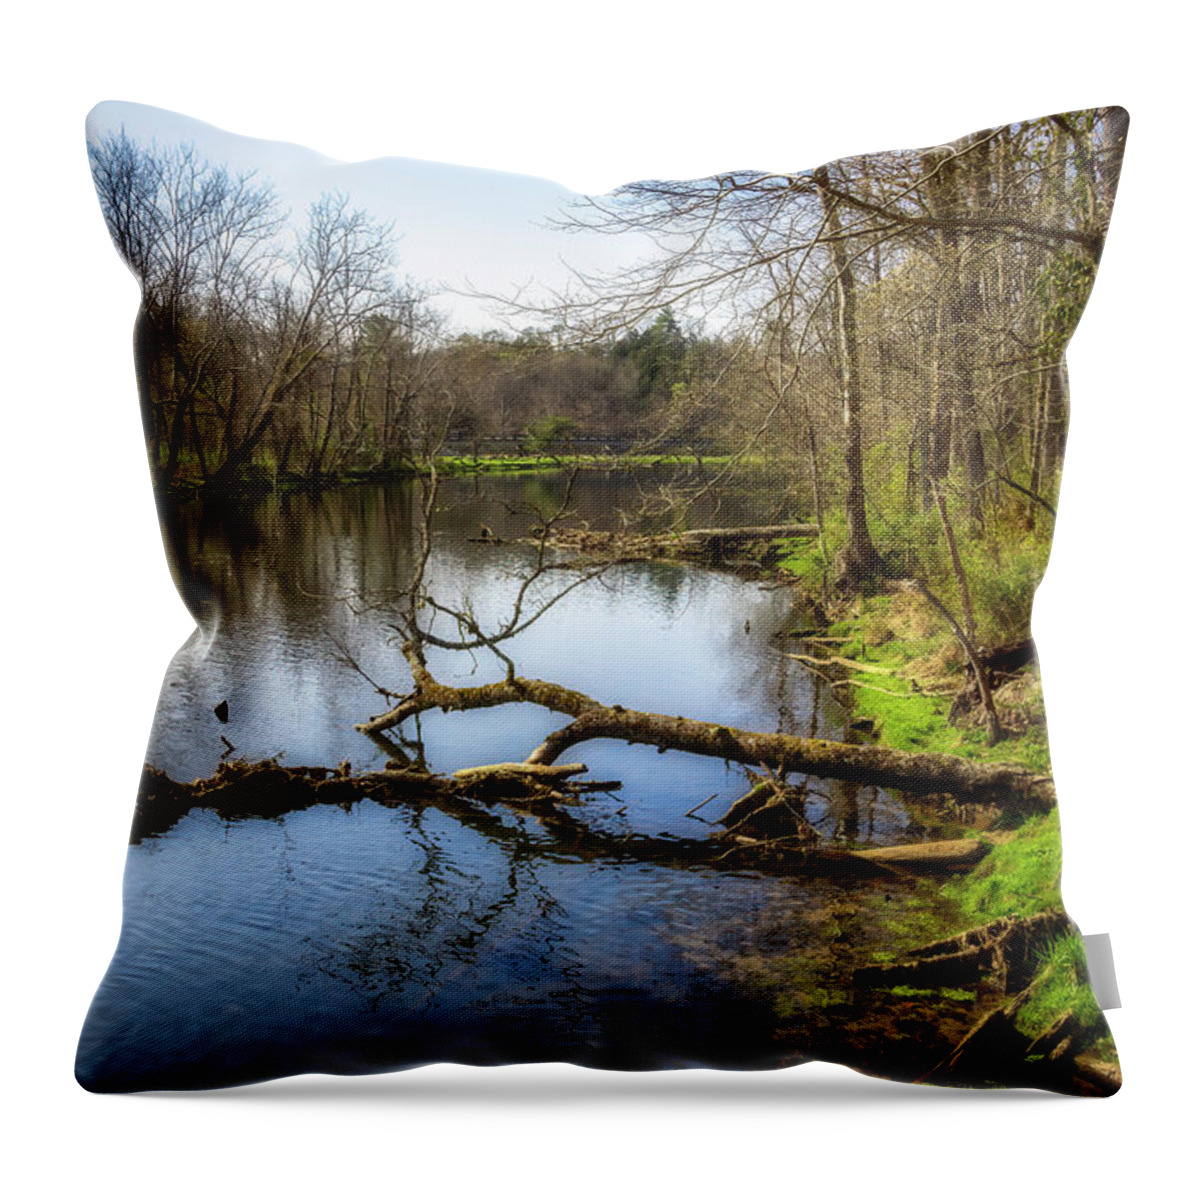 River; Reflection; South Holston; Tennesseee; Northeast Tennessee; Spring; Springtime; Green; Blue; Grass; Tree; Trees; Reflections; Cloud; Clouds; Water; Stream; Tributary; Rock; Rocks; Outdoor Photography Throw Pillow featuring the photograph South Holston River by Shelia Hunt